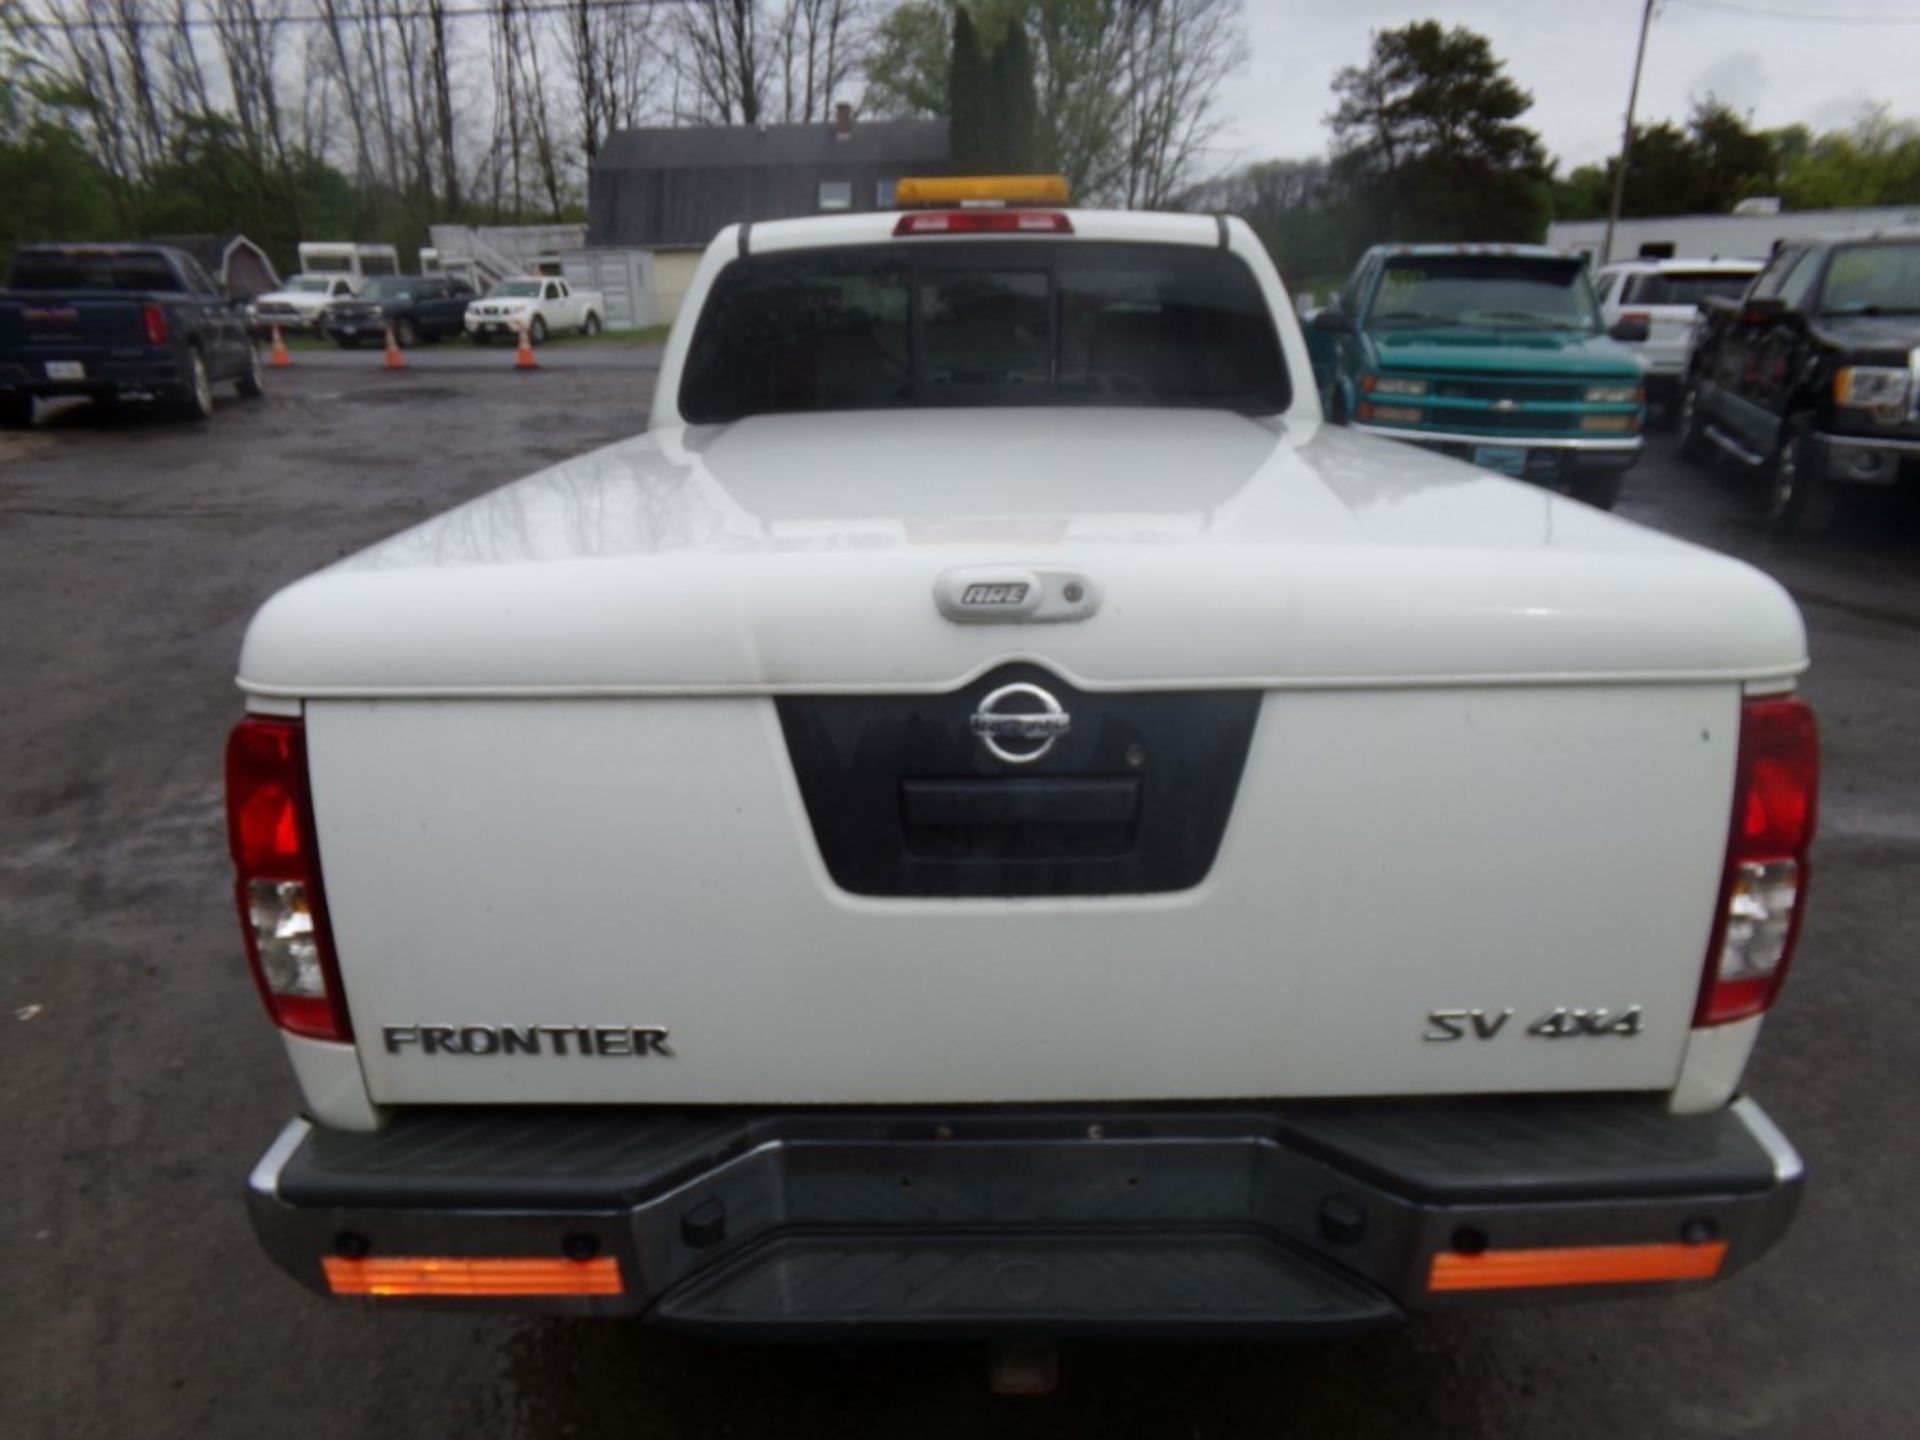 2015 Nissan Frontier 4WD Ext. Cab, 6 Cyl., Auto Trans., PW/PL, , Excellent Tires, (3) Rear Tool - Image 3 of 9